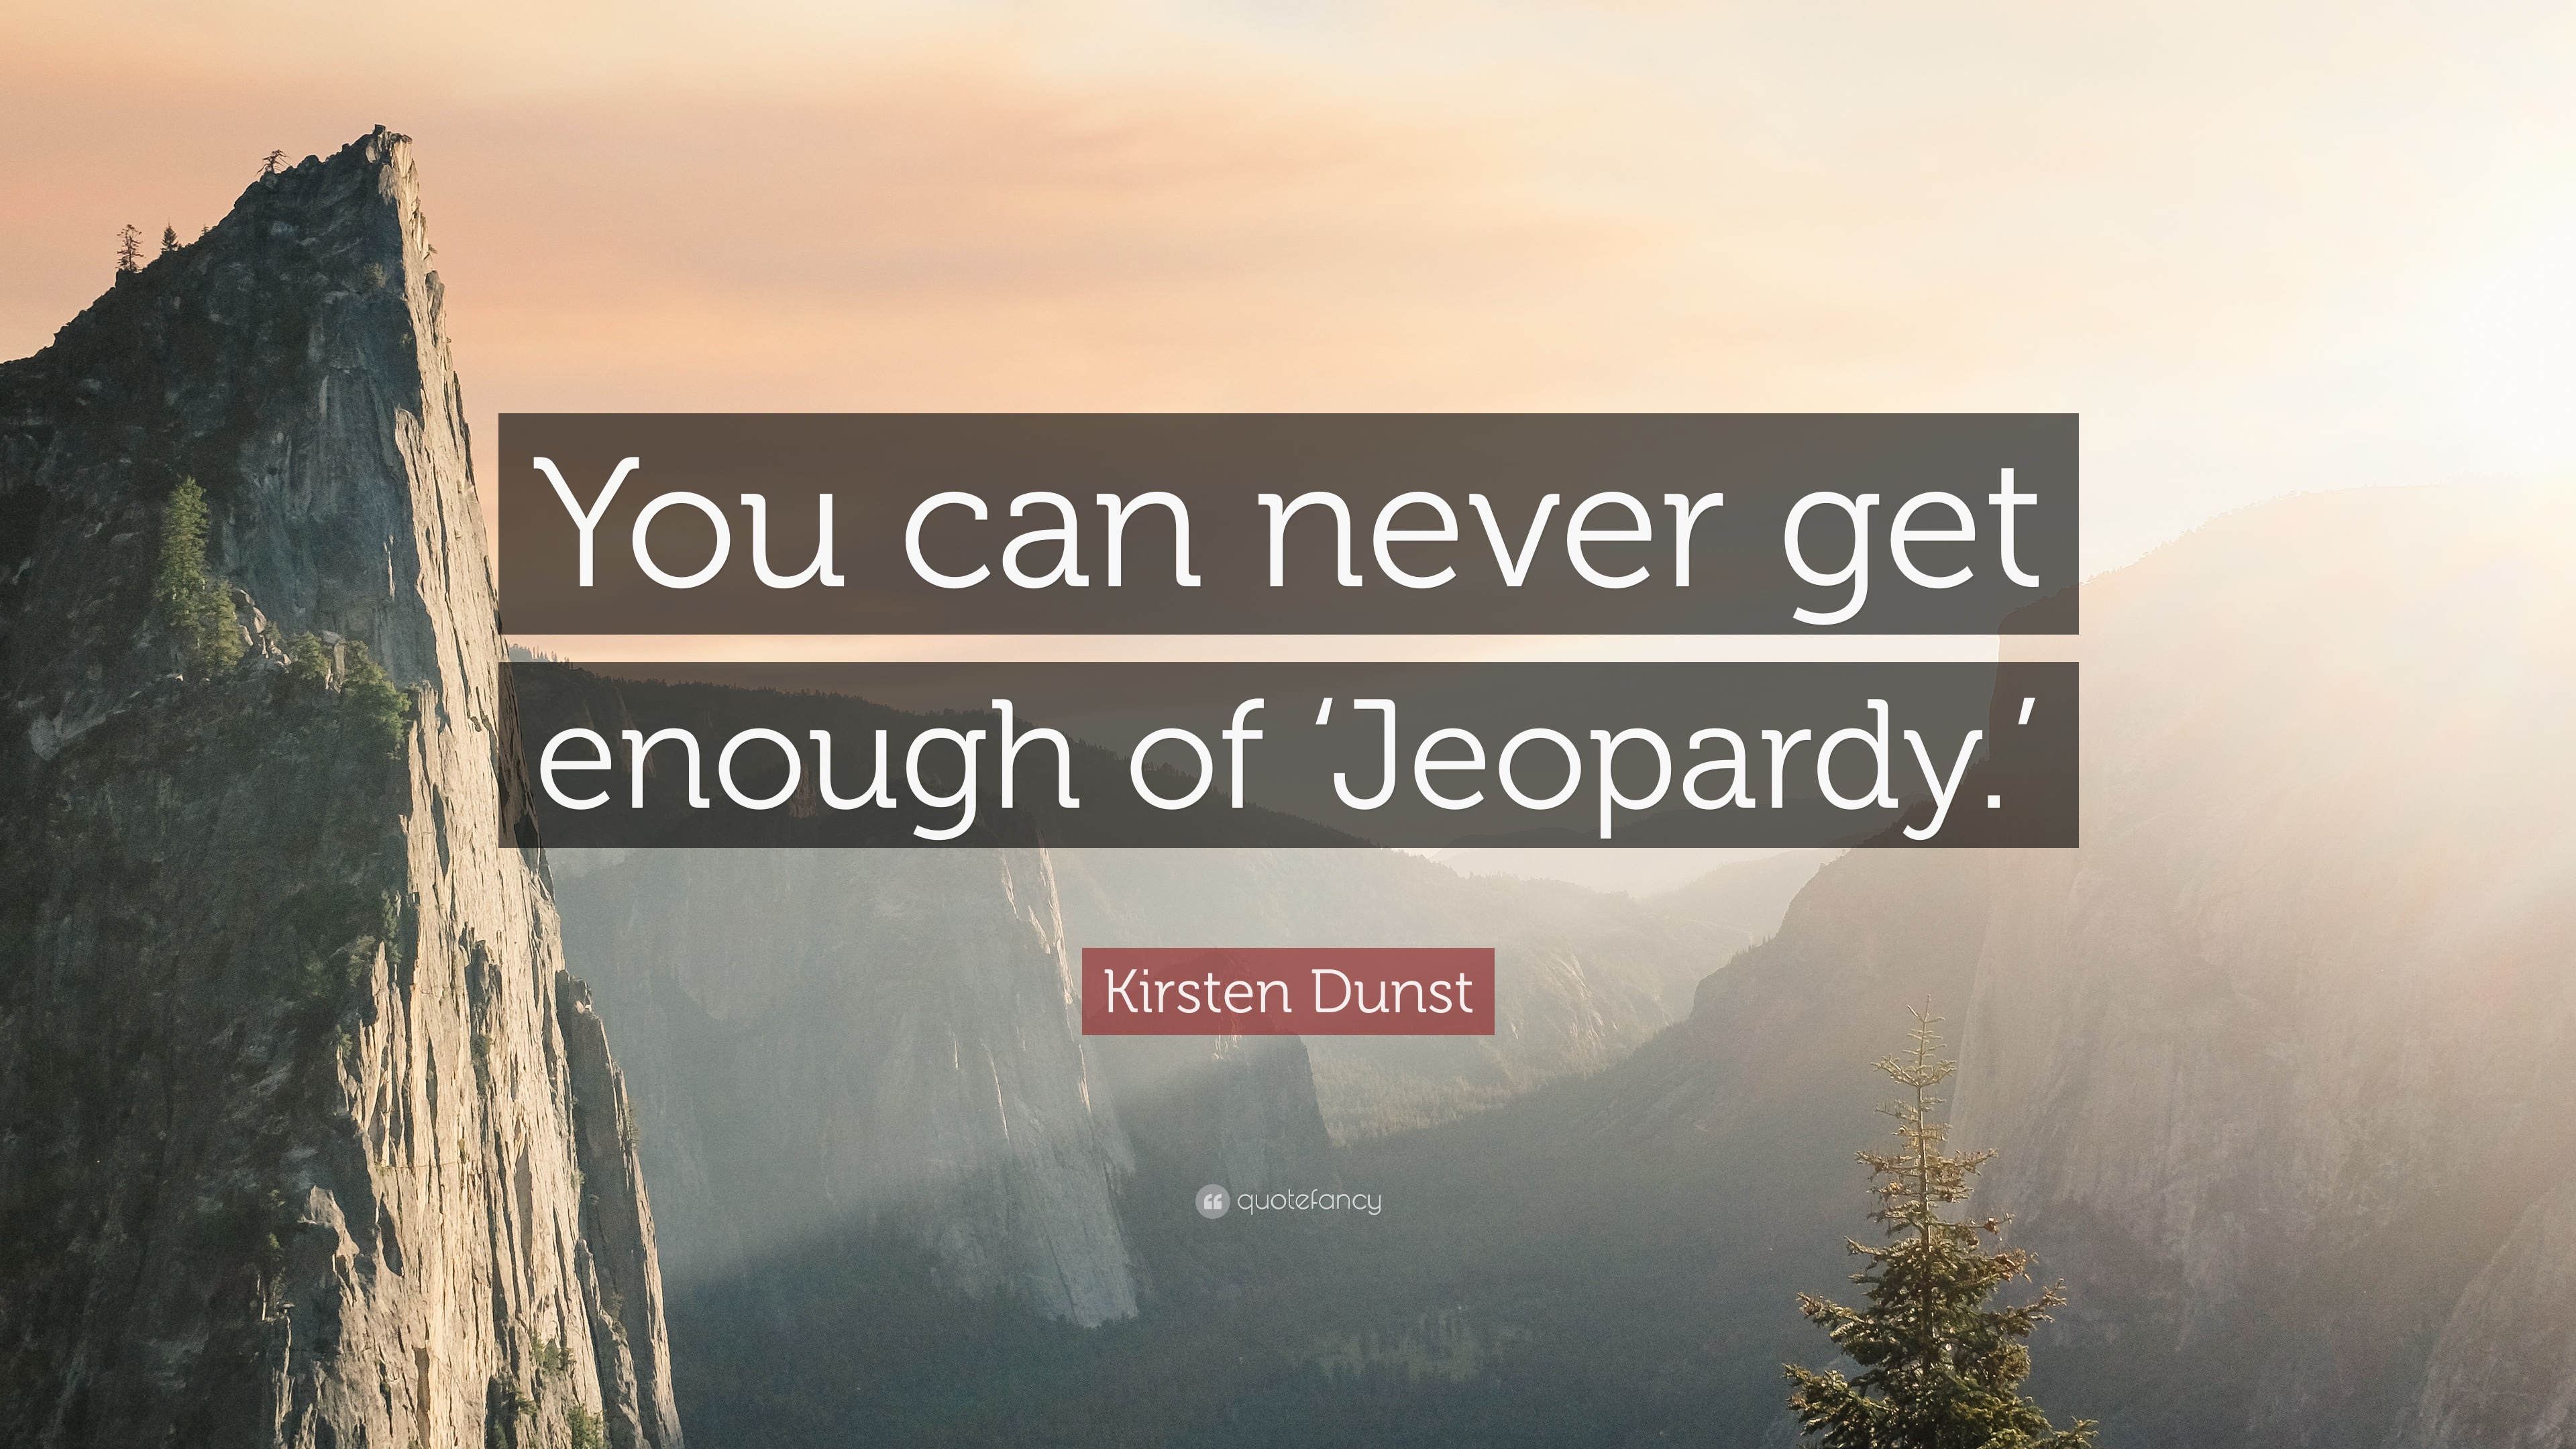 Kirsten Dunst Quote: "You can never get enough of 'Jeopardy. 